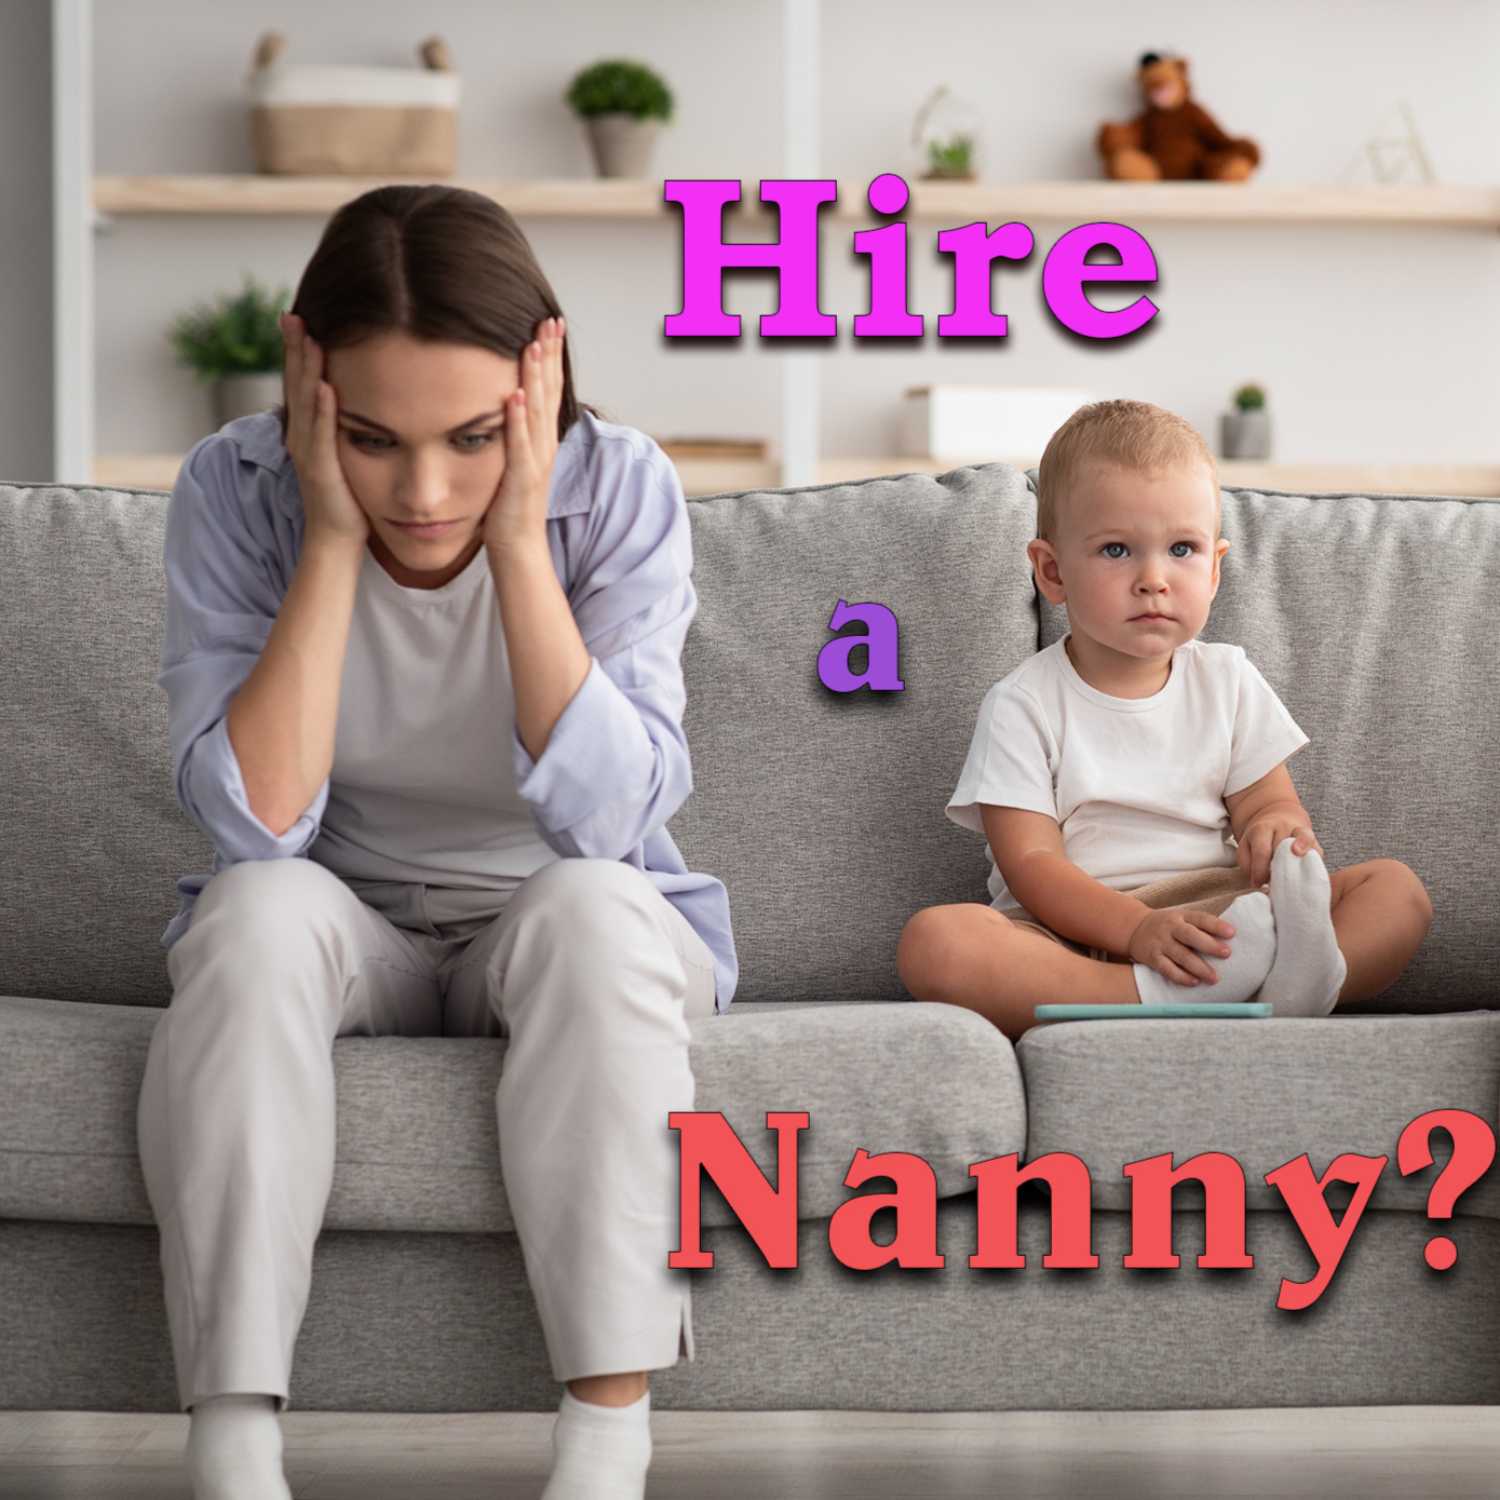 How to hire and select the perfect nanny